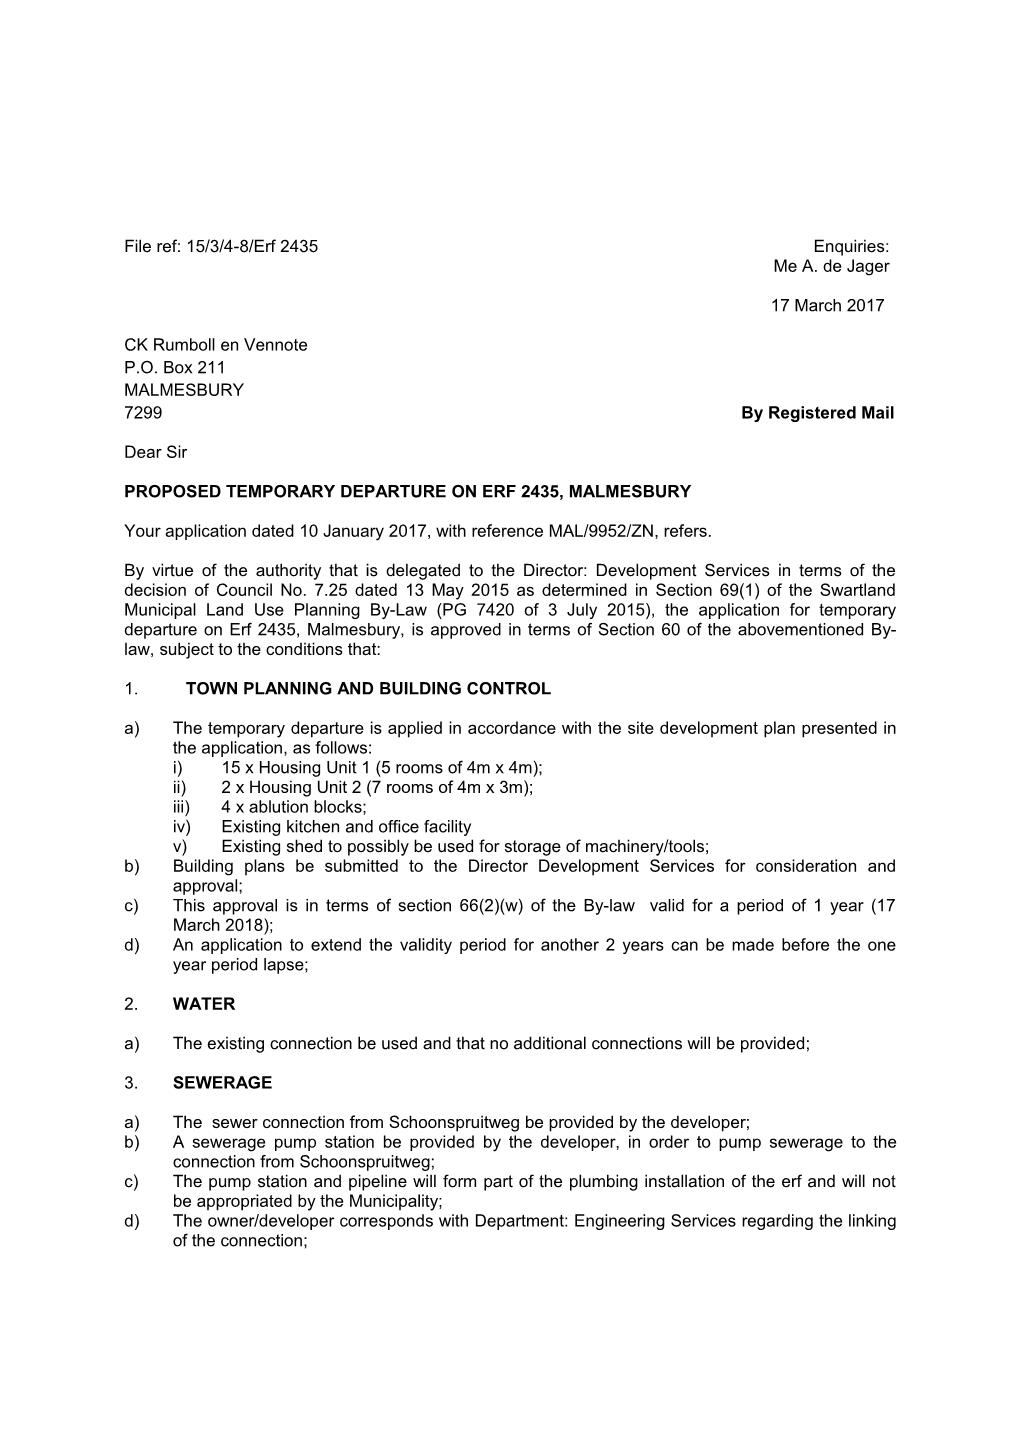 Proposed Temporary Departure Onerf 2435,Malmesbury